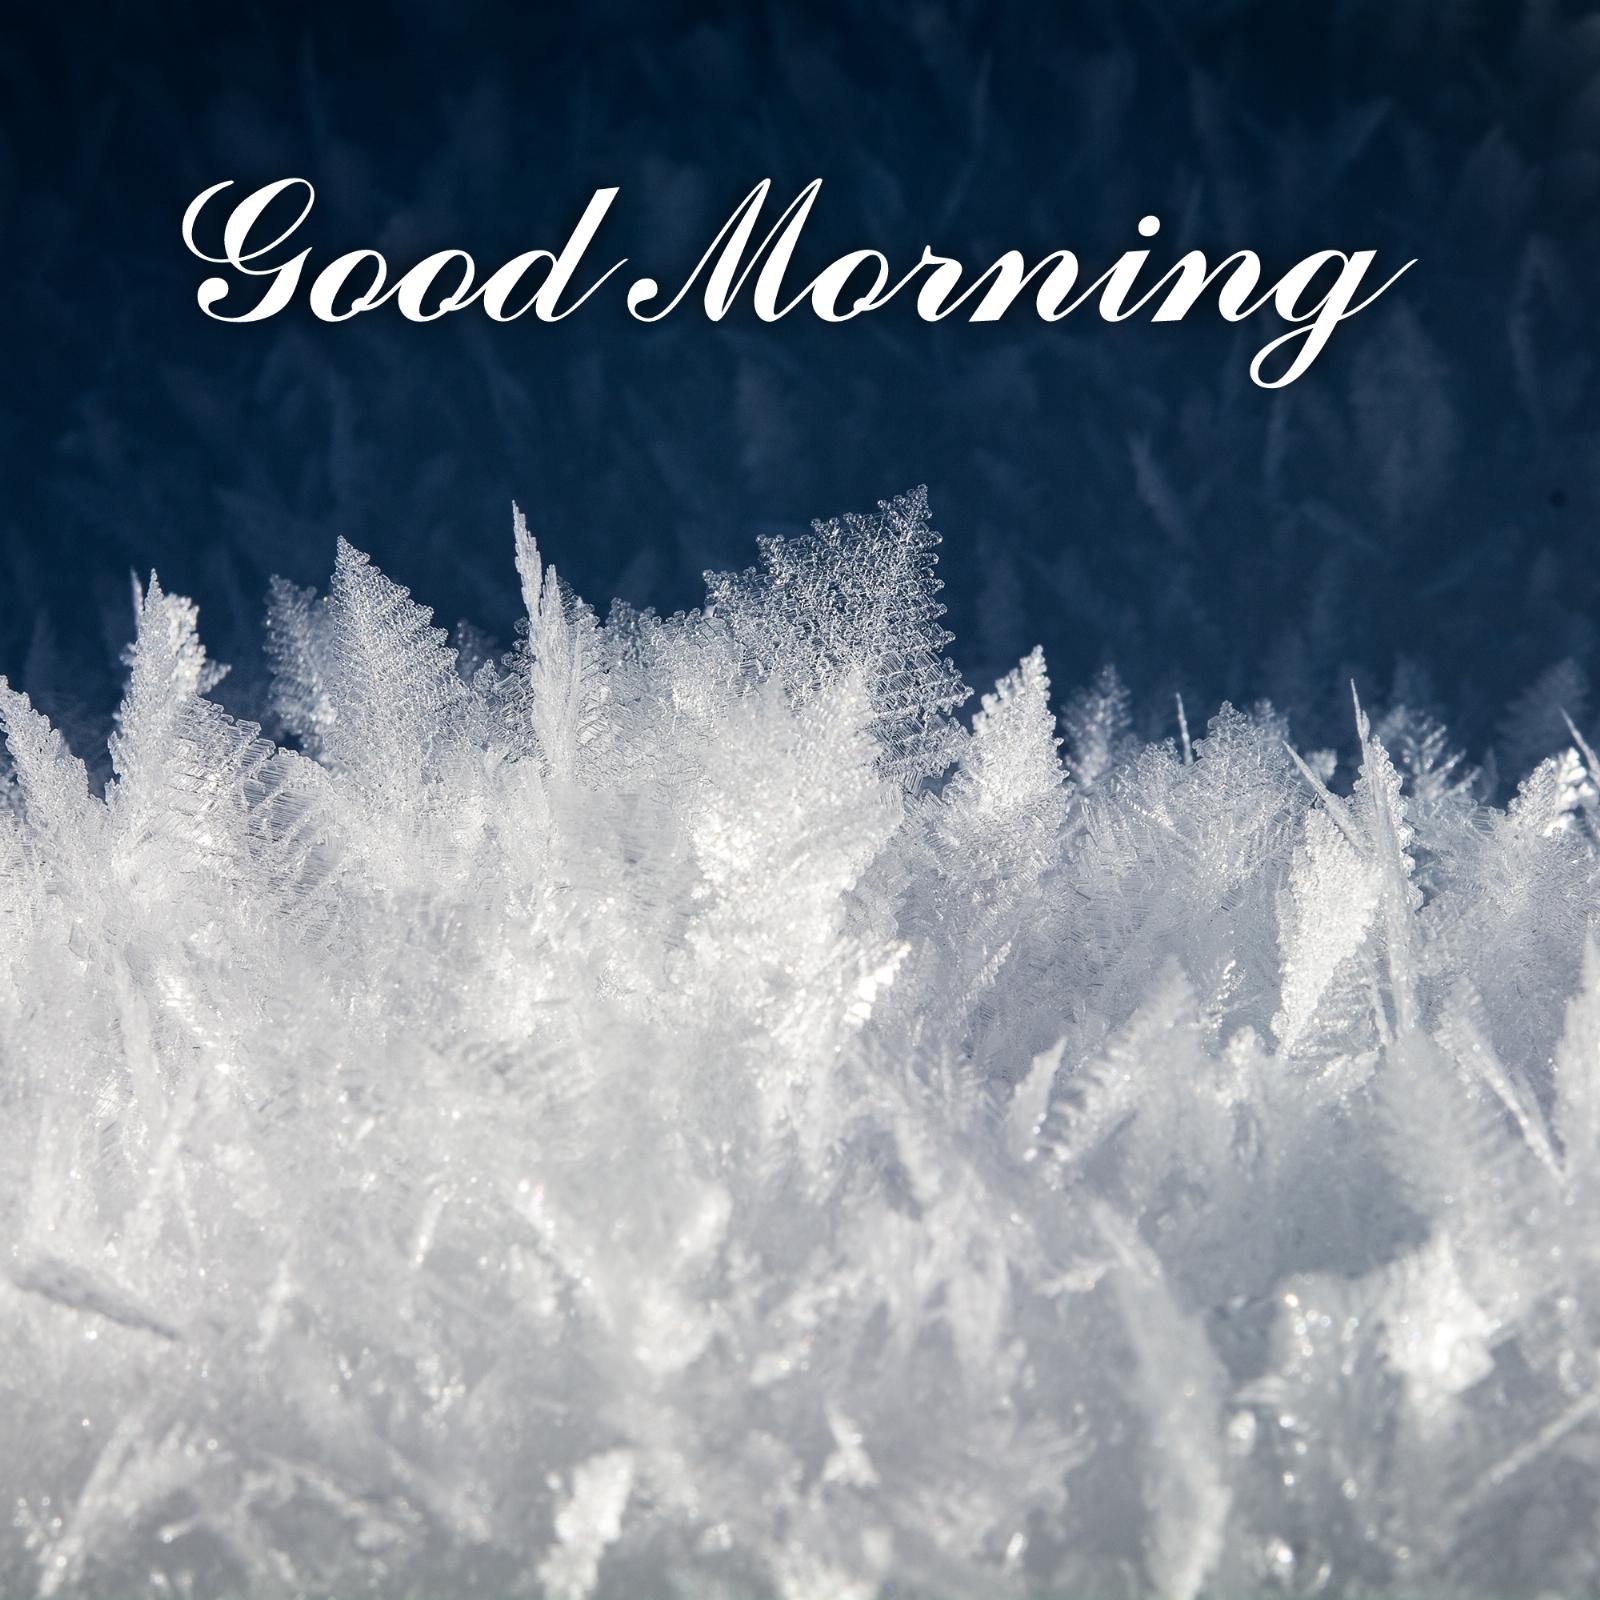 Winter Good Morning Images